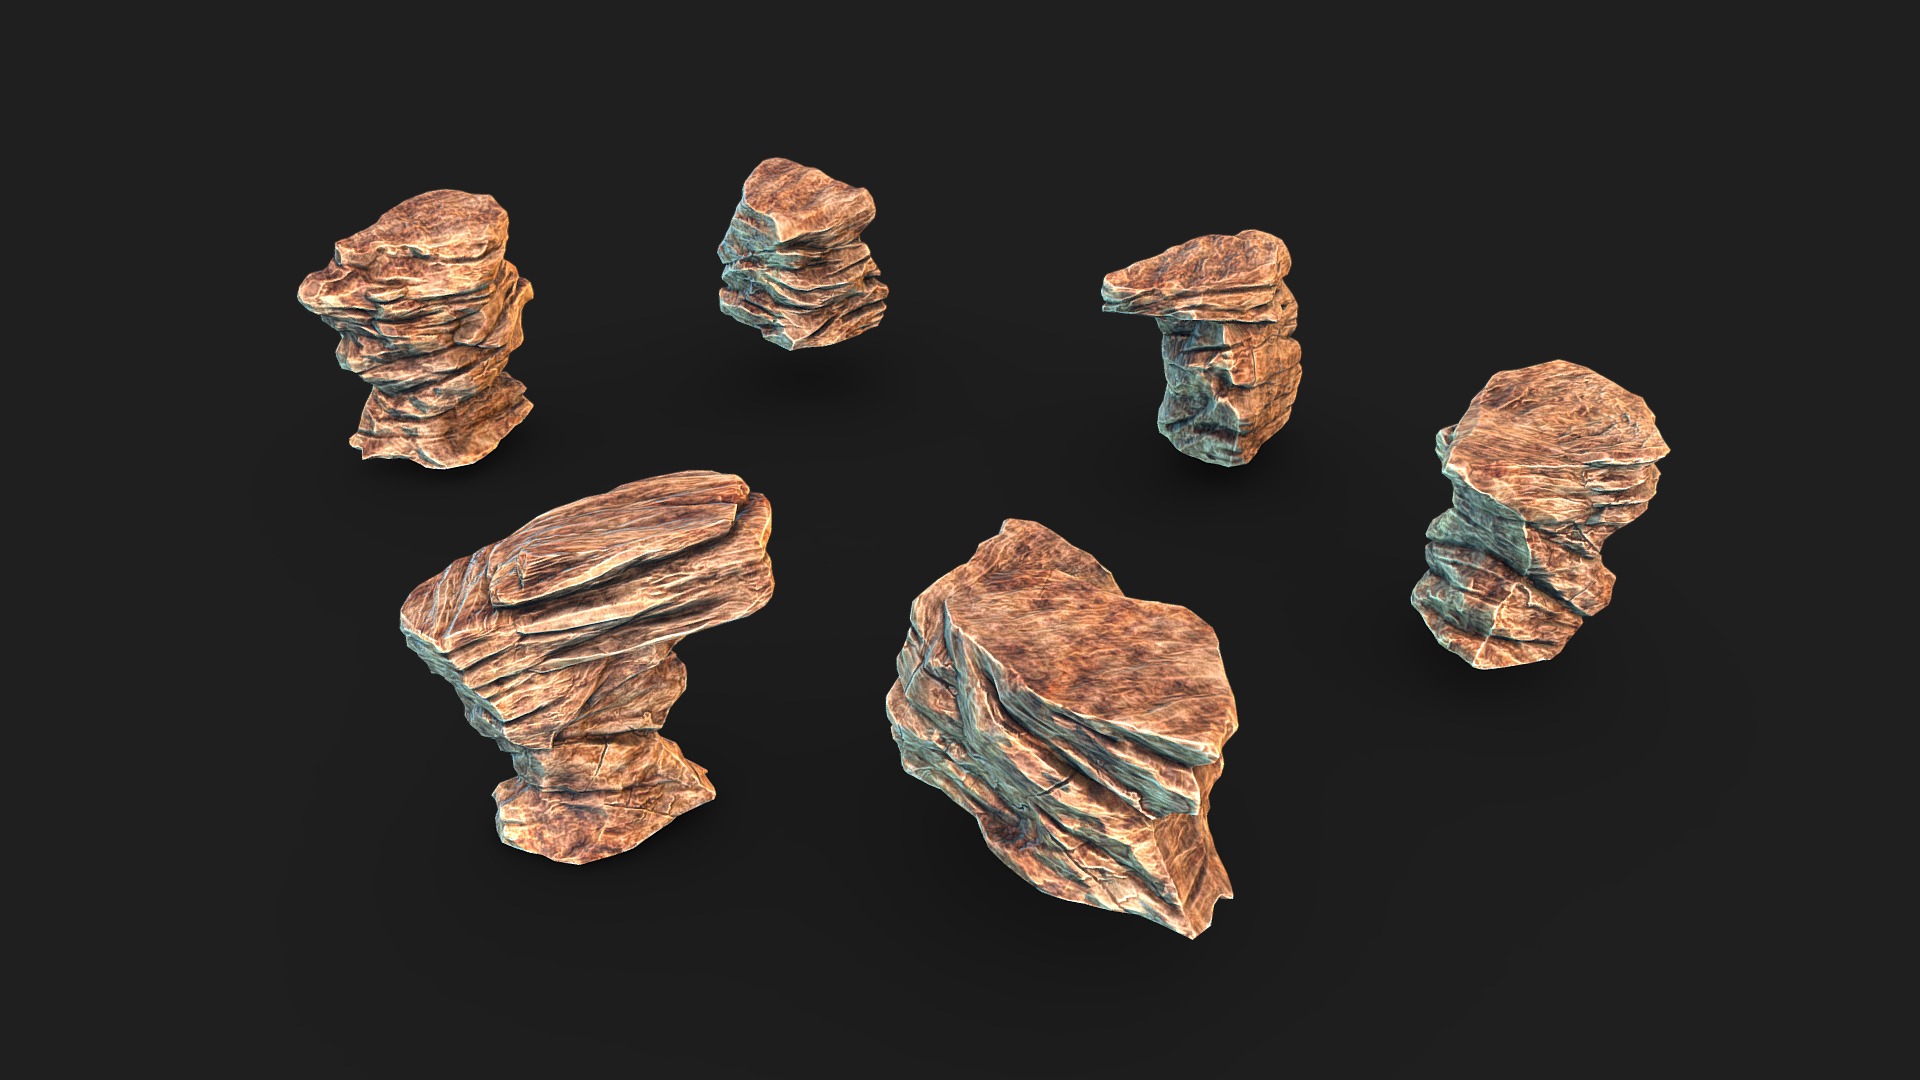 3D model Canyon Cliff Rocks 02 - This is a 3D model of the Canyon Cliff Rocks 02. The 3D model is about a group of different colored rocks.